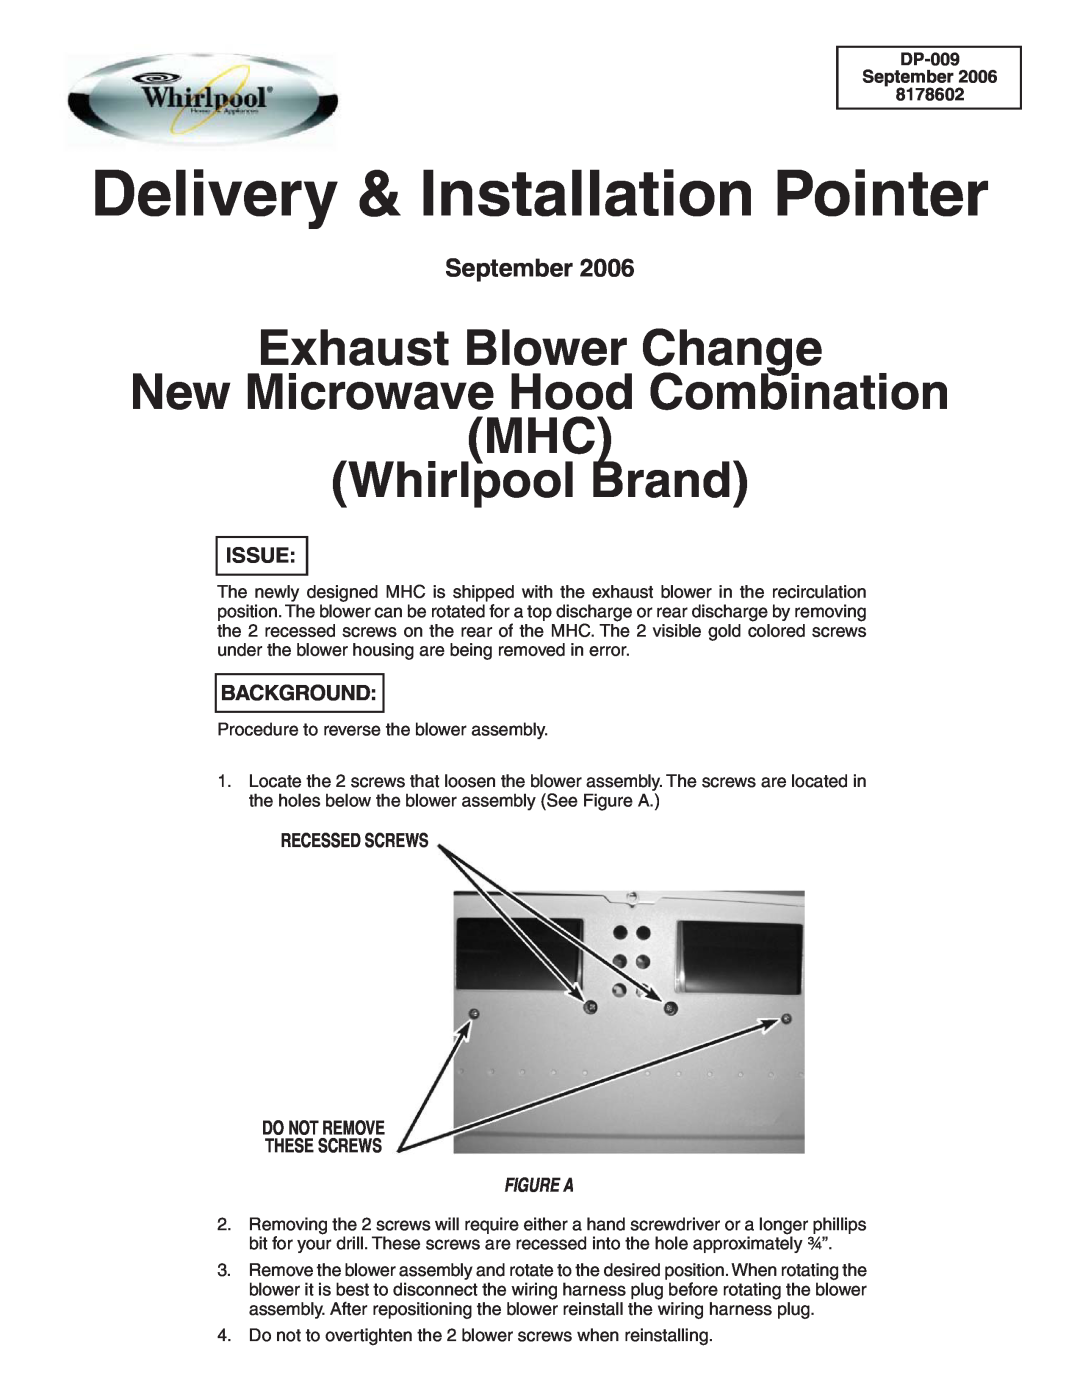 Whirlpool DP-009 manual Exhaust Blower Change, New Microwave Hood Combination MHC, Whirlpool Brand, Issue, Background 